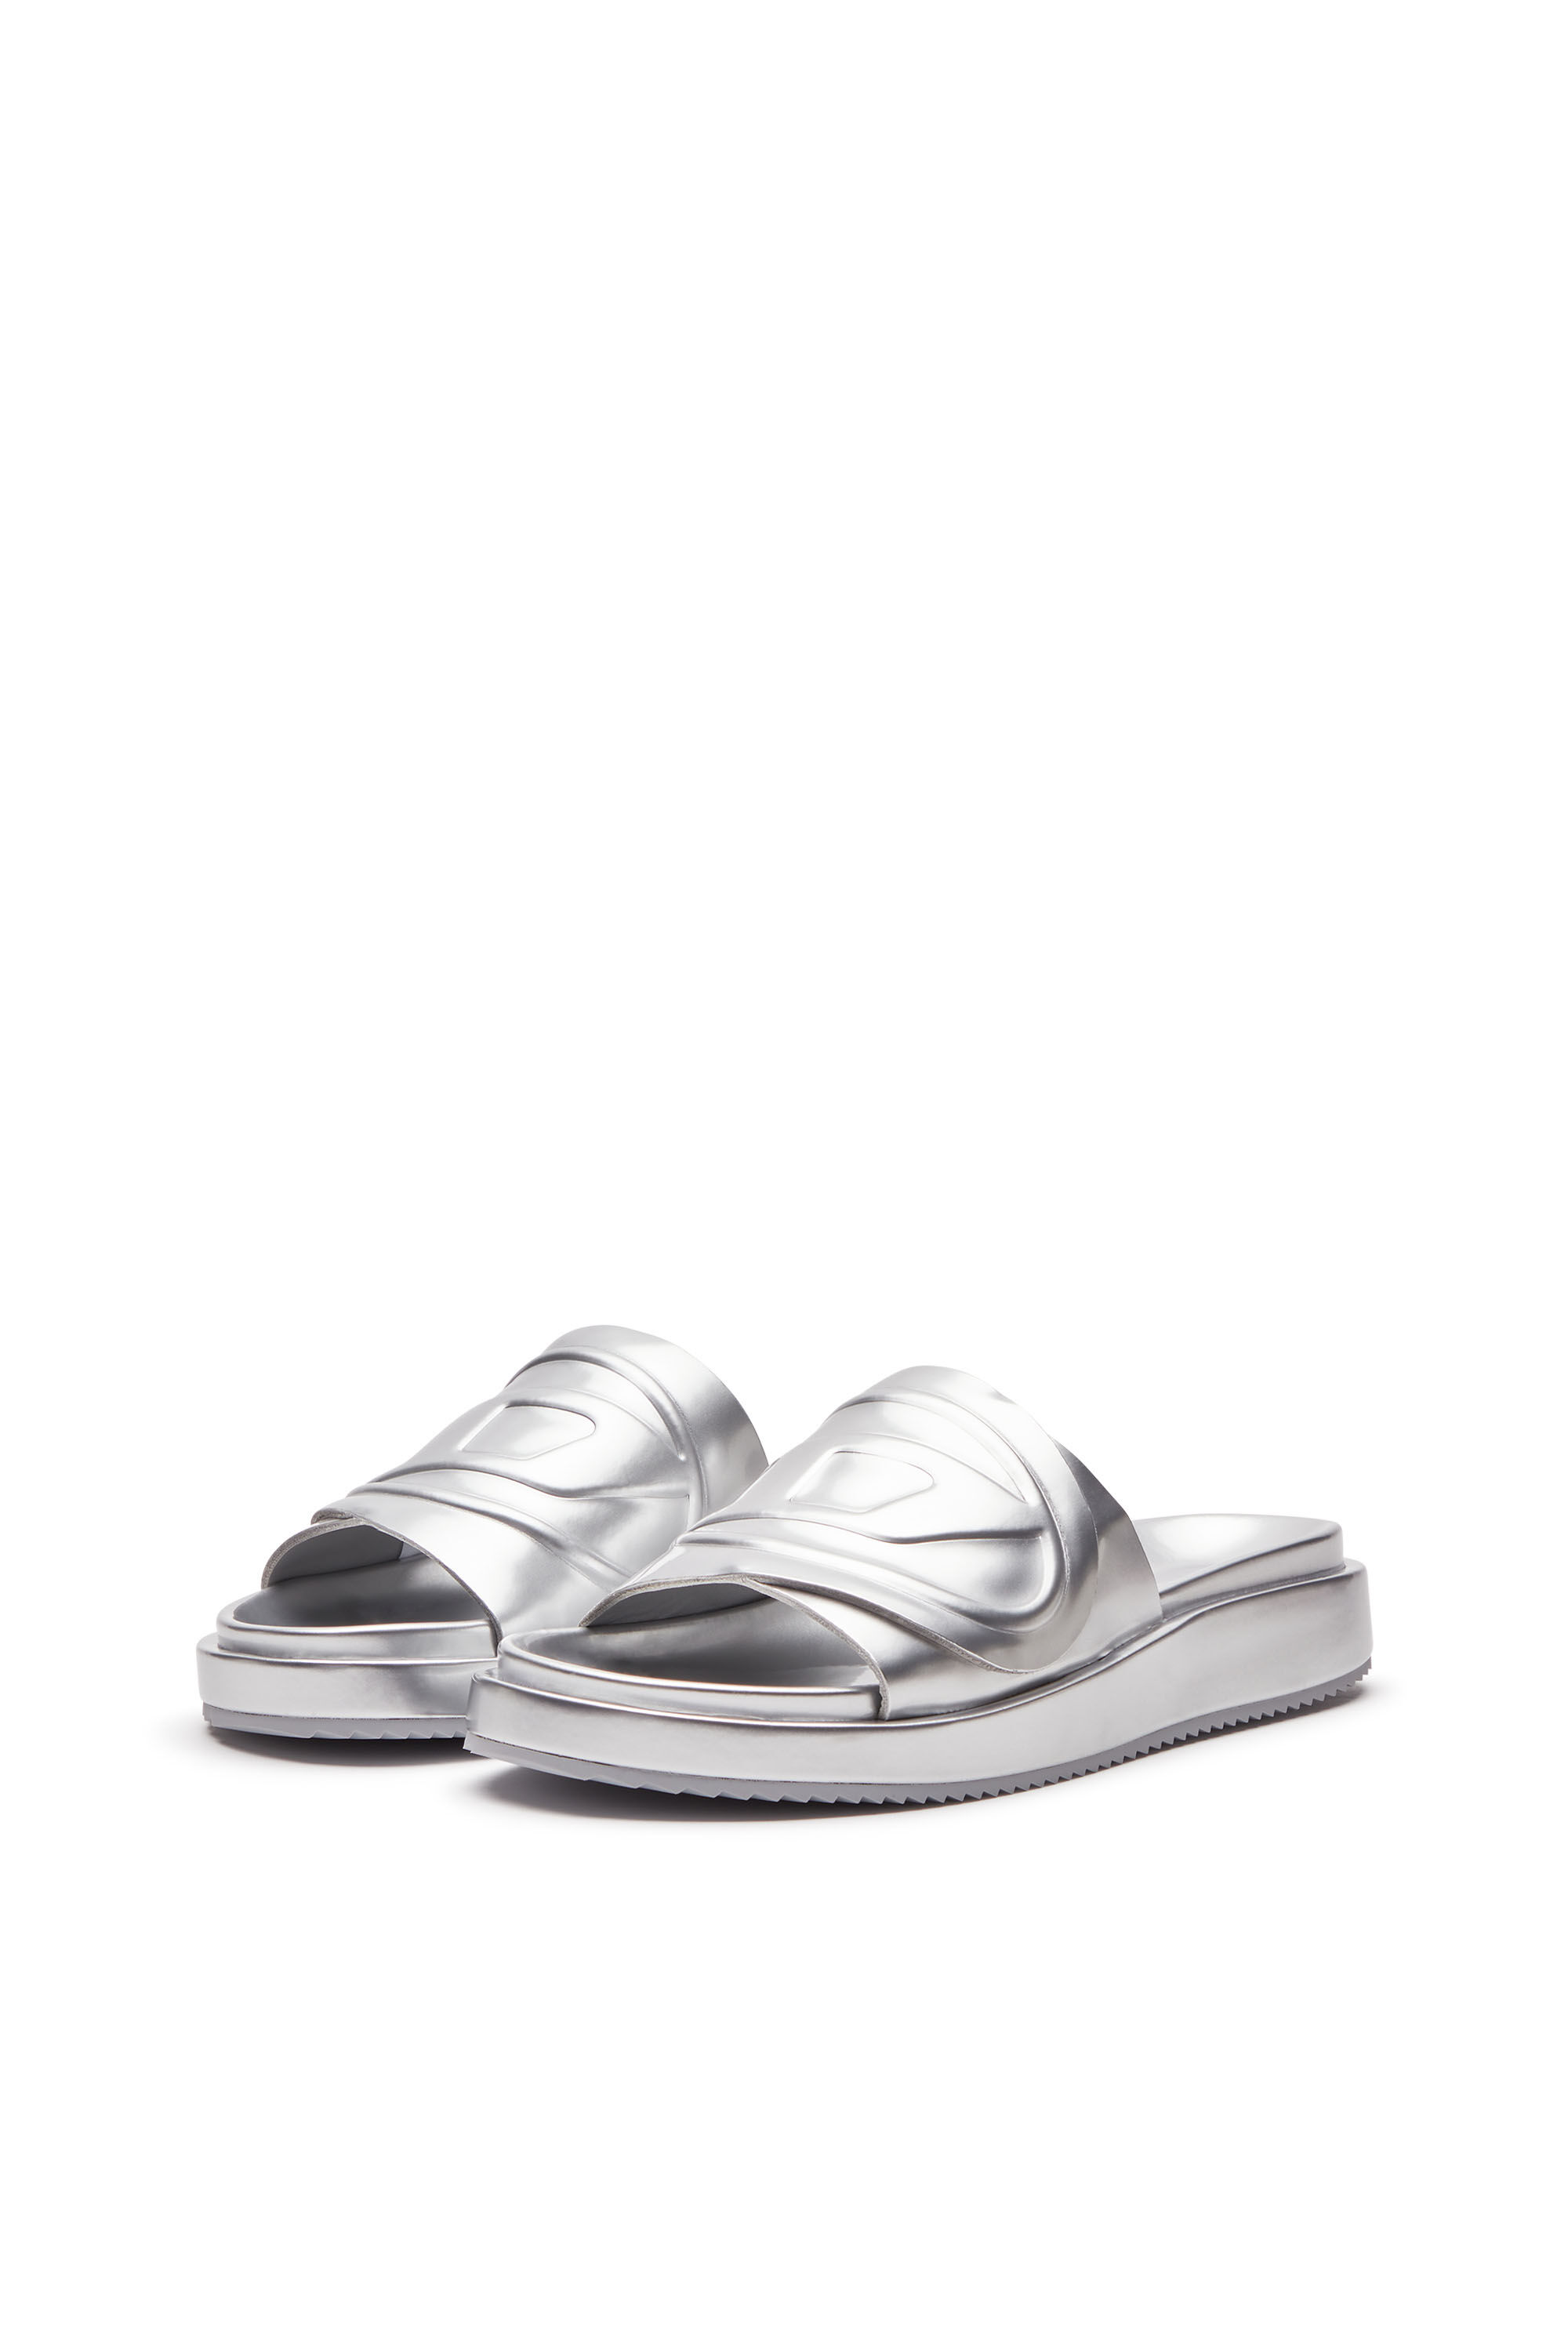 Diesel - SA-SLIDE D OVAL W, Woman Sa-Slide D-Metallic slide sandals with Oval D strap in Silver - Image 8